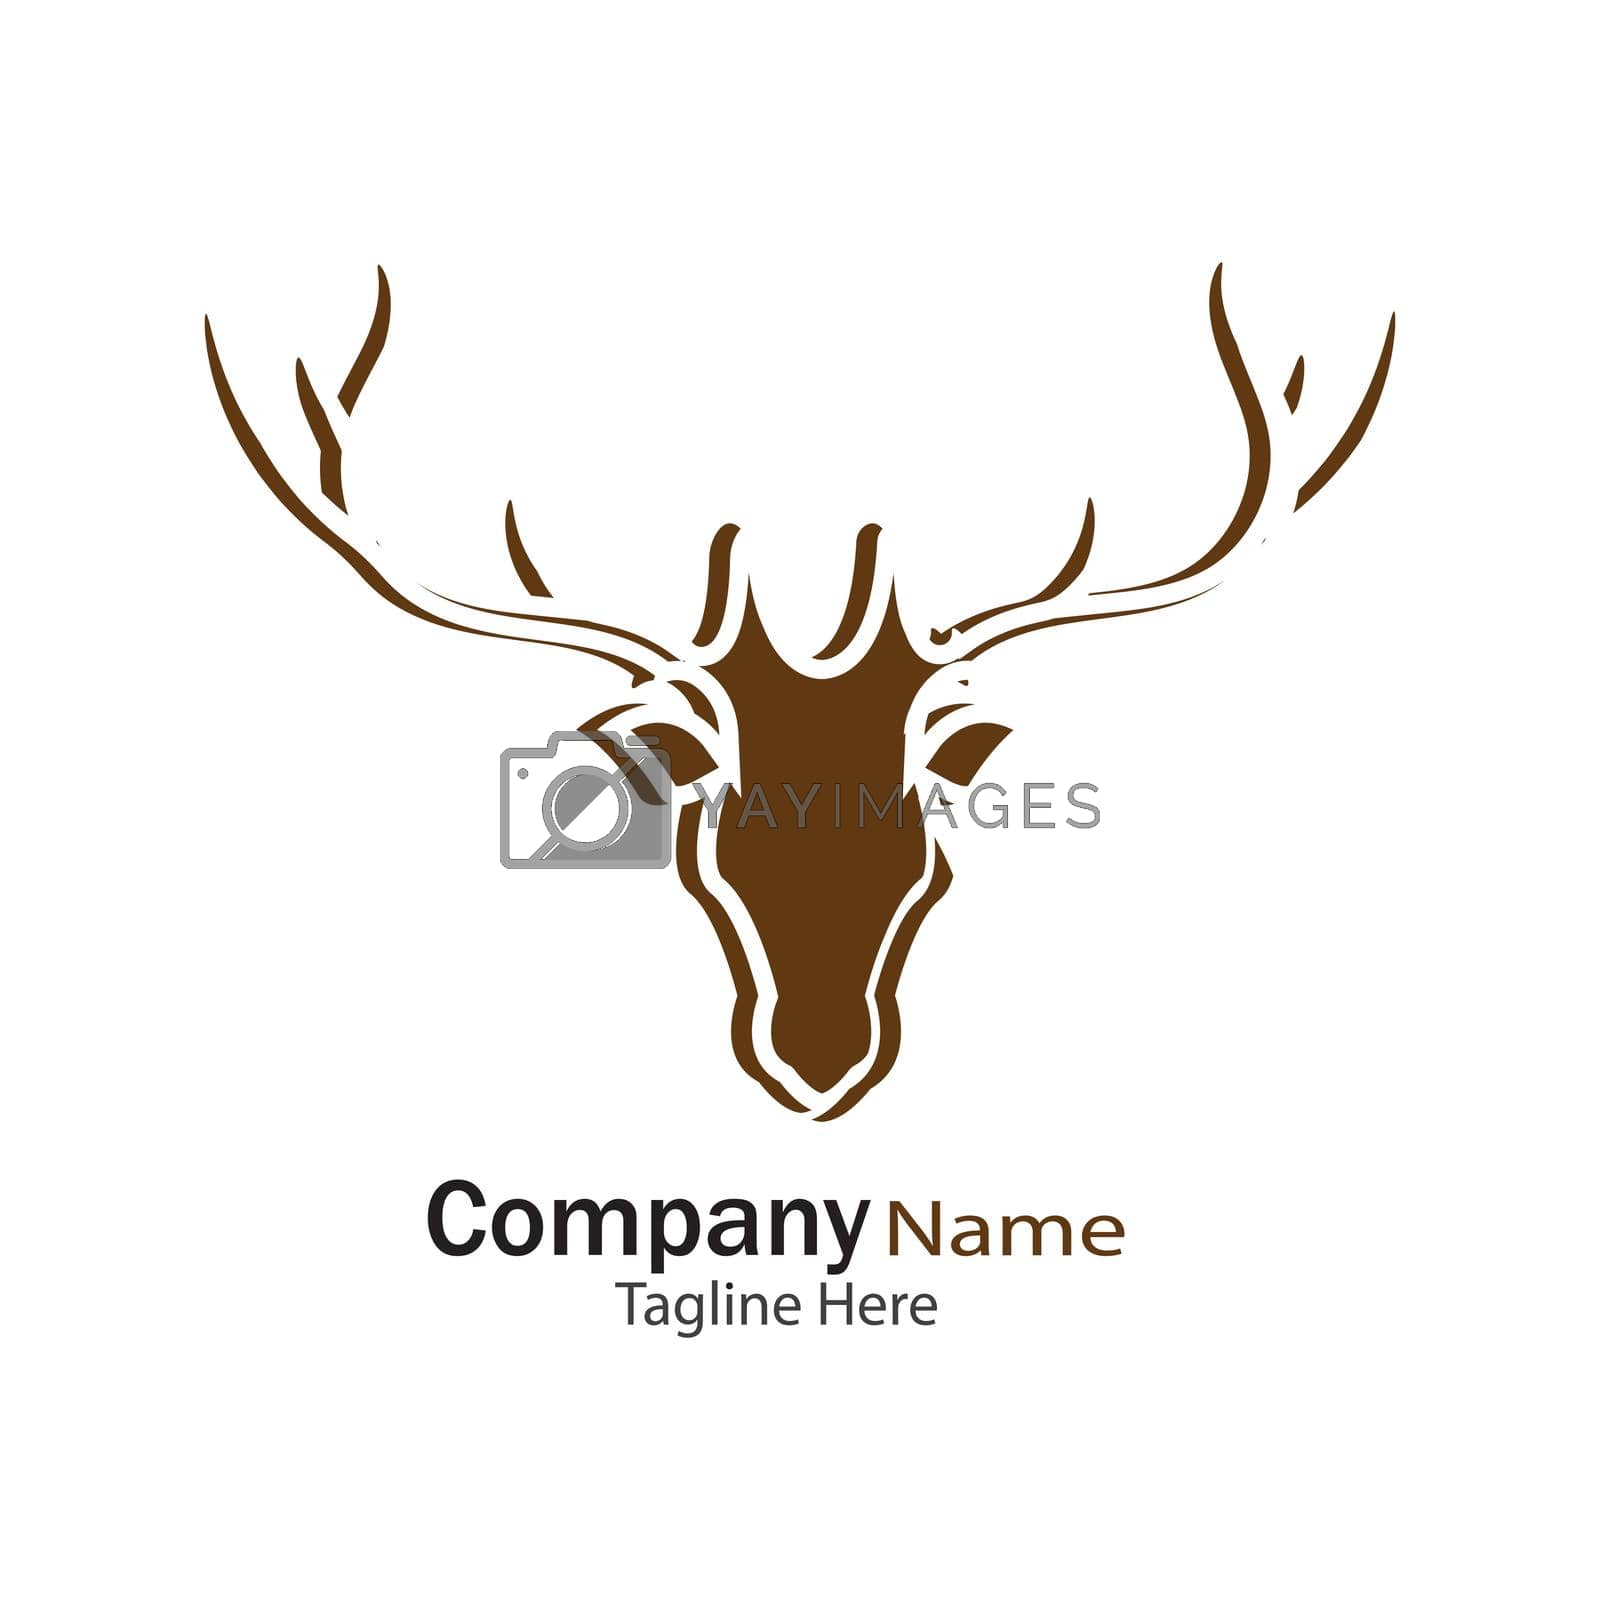 Royalty free image of Deer head Logo Template vector icon illustration design by Graphicindo